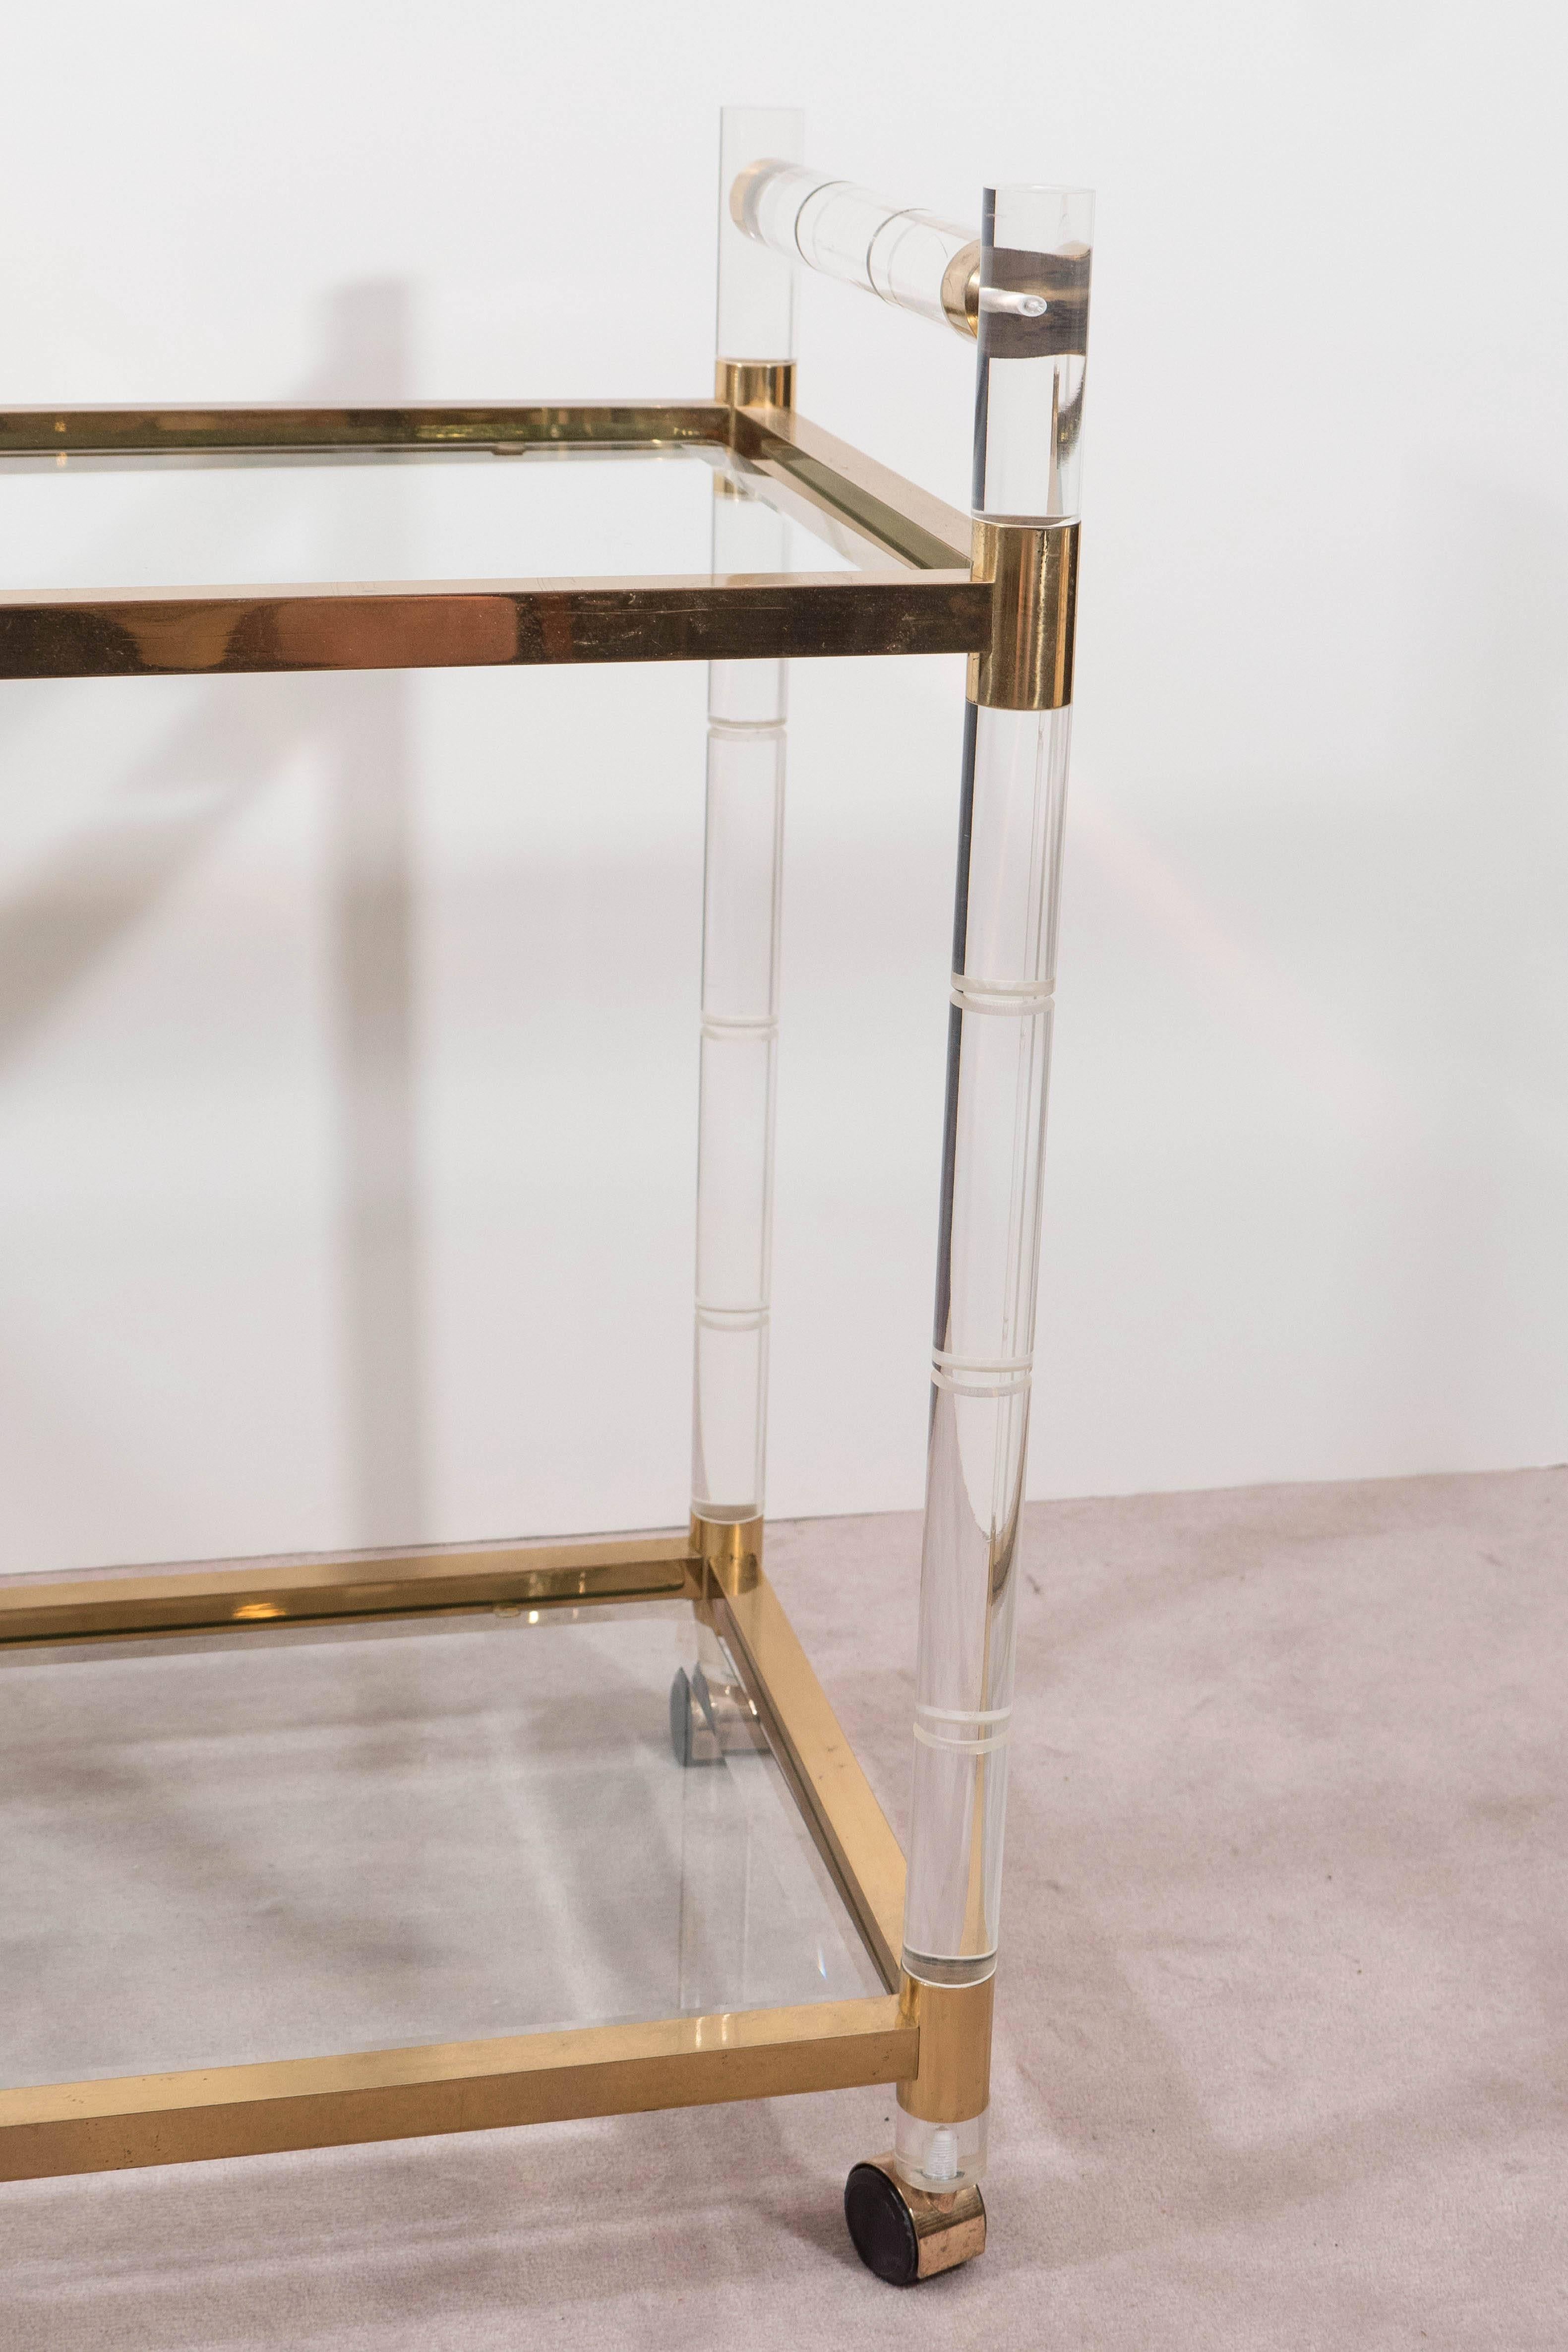 A bar and serving cart by designer Charles Hollis Jones, with two-tier glass tops, inset against polished brass frames and faux bamboo legs and bar handles in Lucite, on casters, circa 1960s-1970s Very good condition, minimal wear consistent with